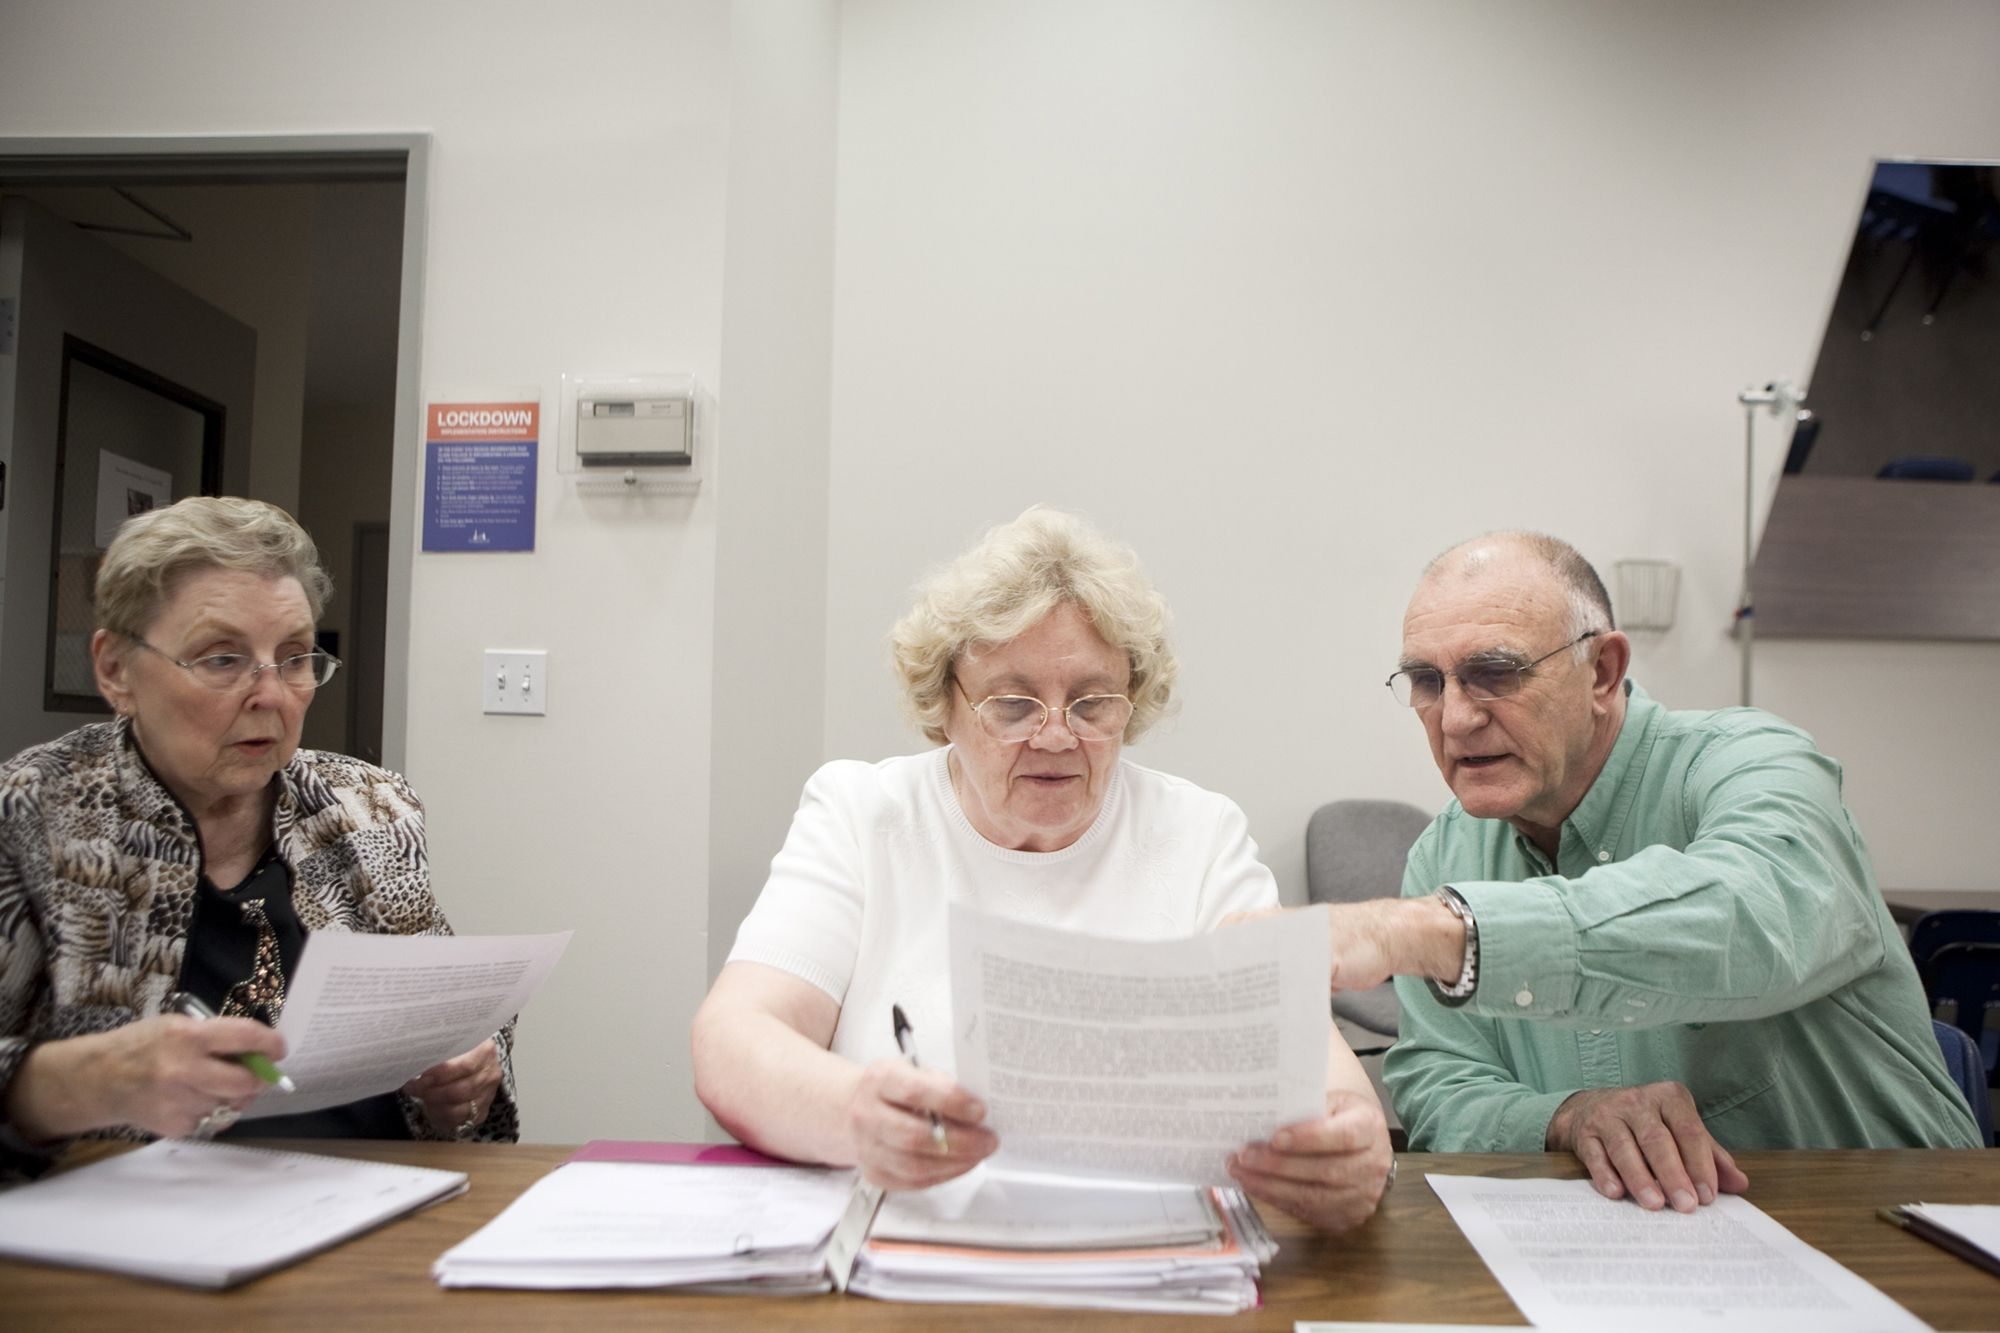 Barbara Saur, from left, Jean Moultrie and Robert Roy read over stories written by classmates in their creative writing class.